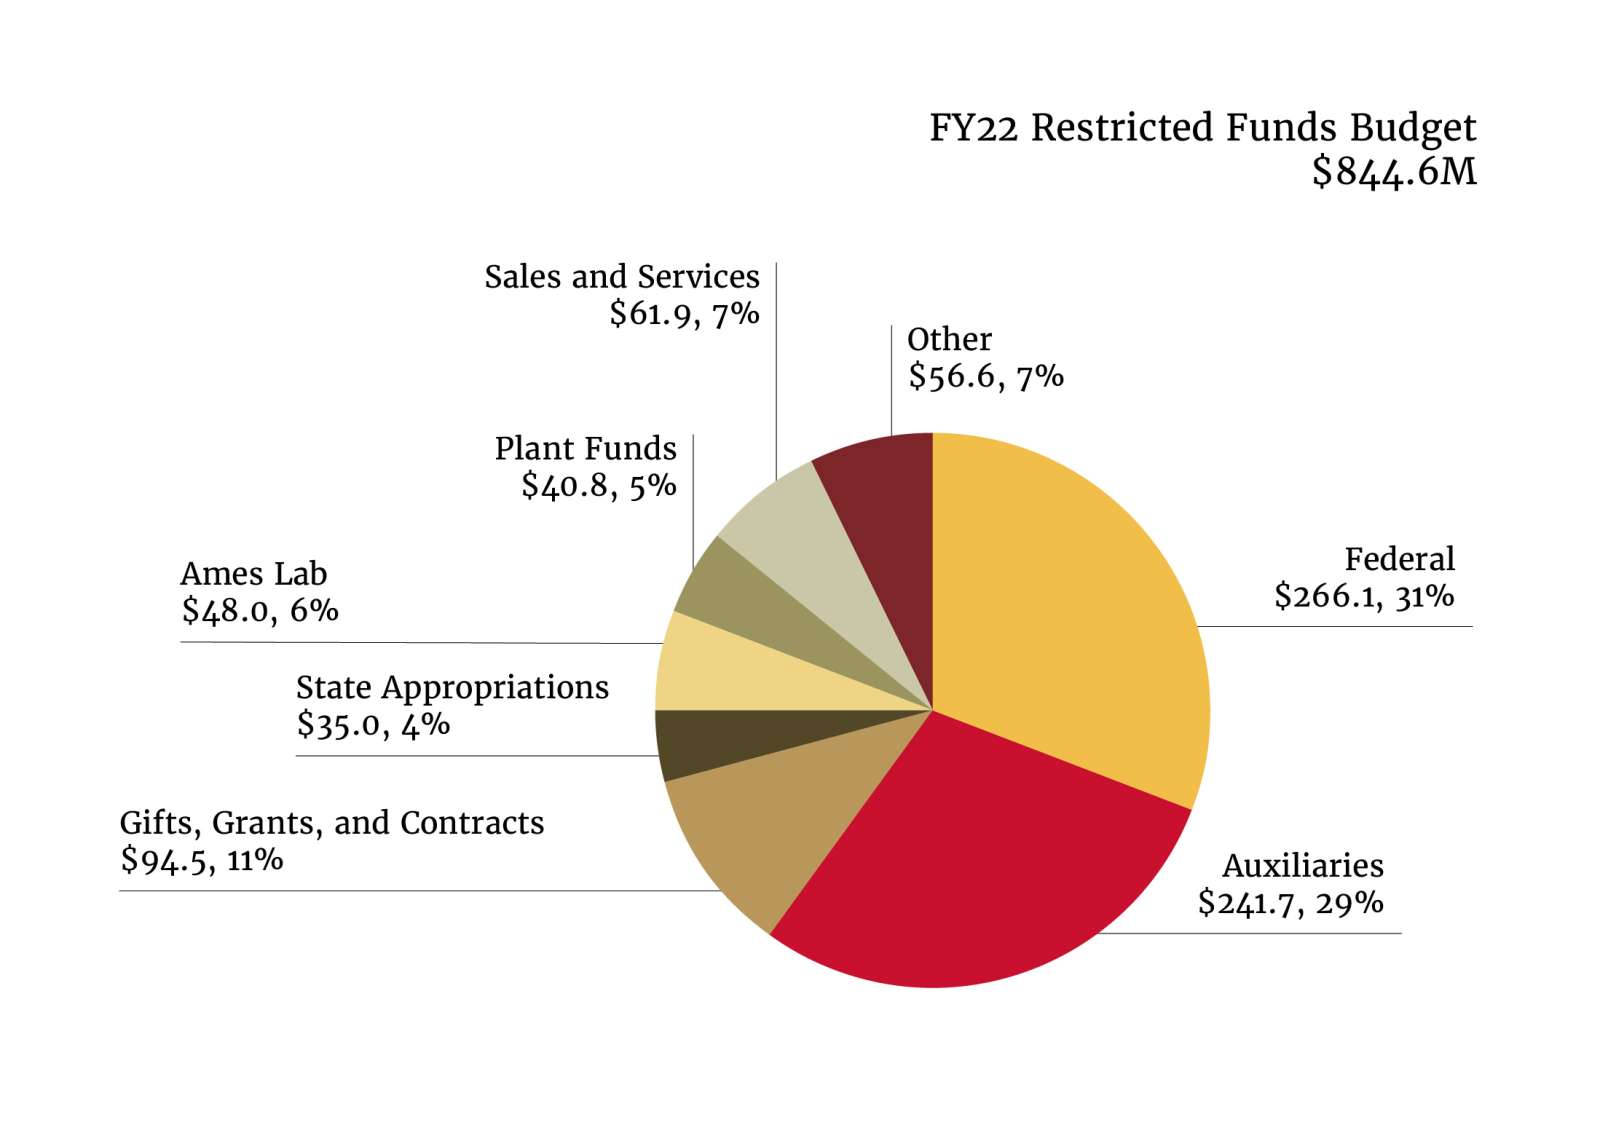 FY2022 restricted funds pie chart